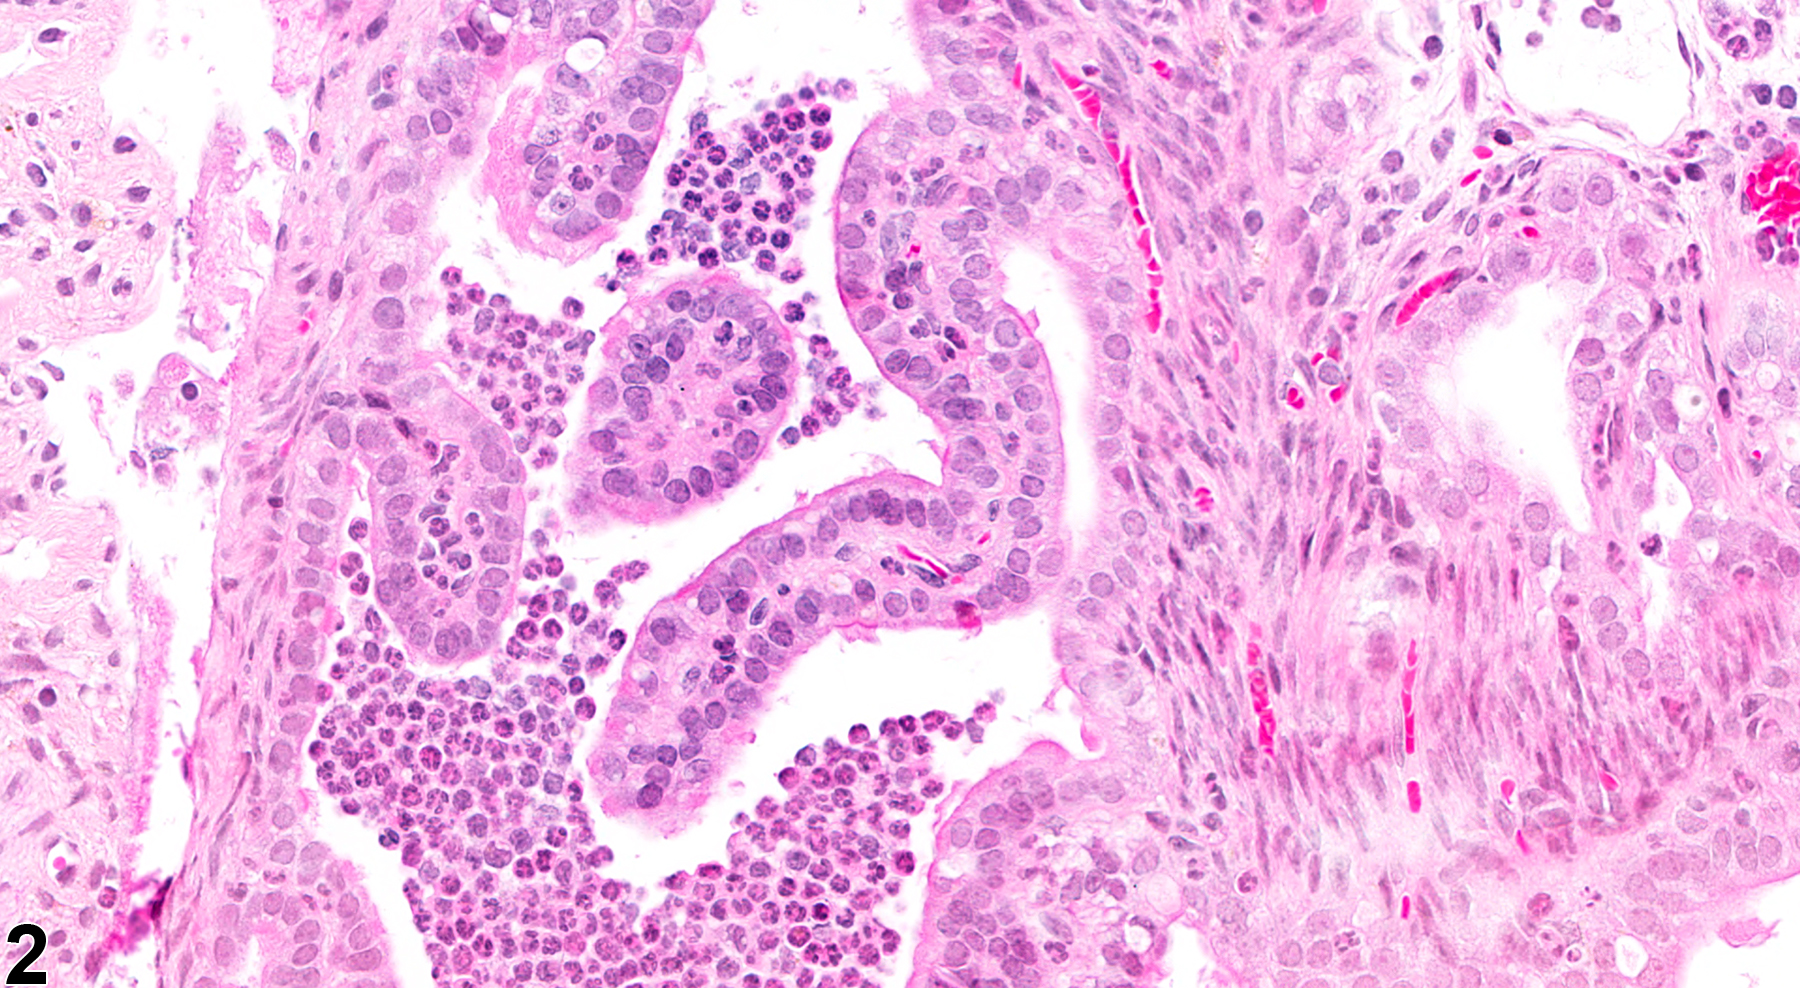 Image of inflammation in the oviduct from a female B6C3F1 mouse in a chronic study